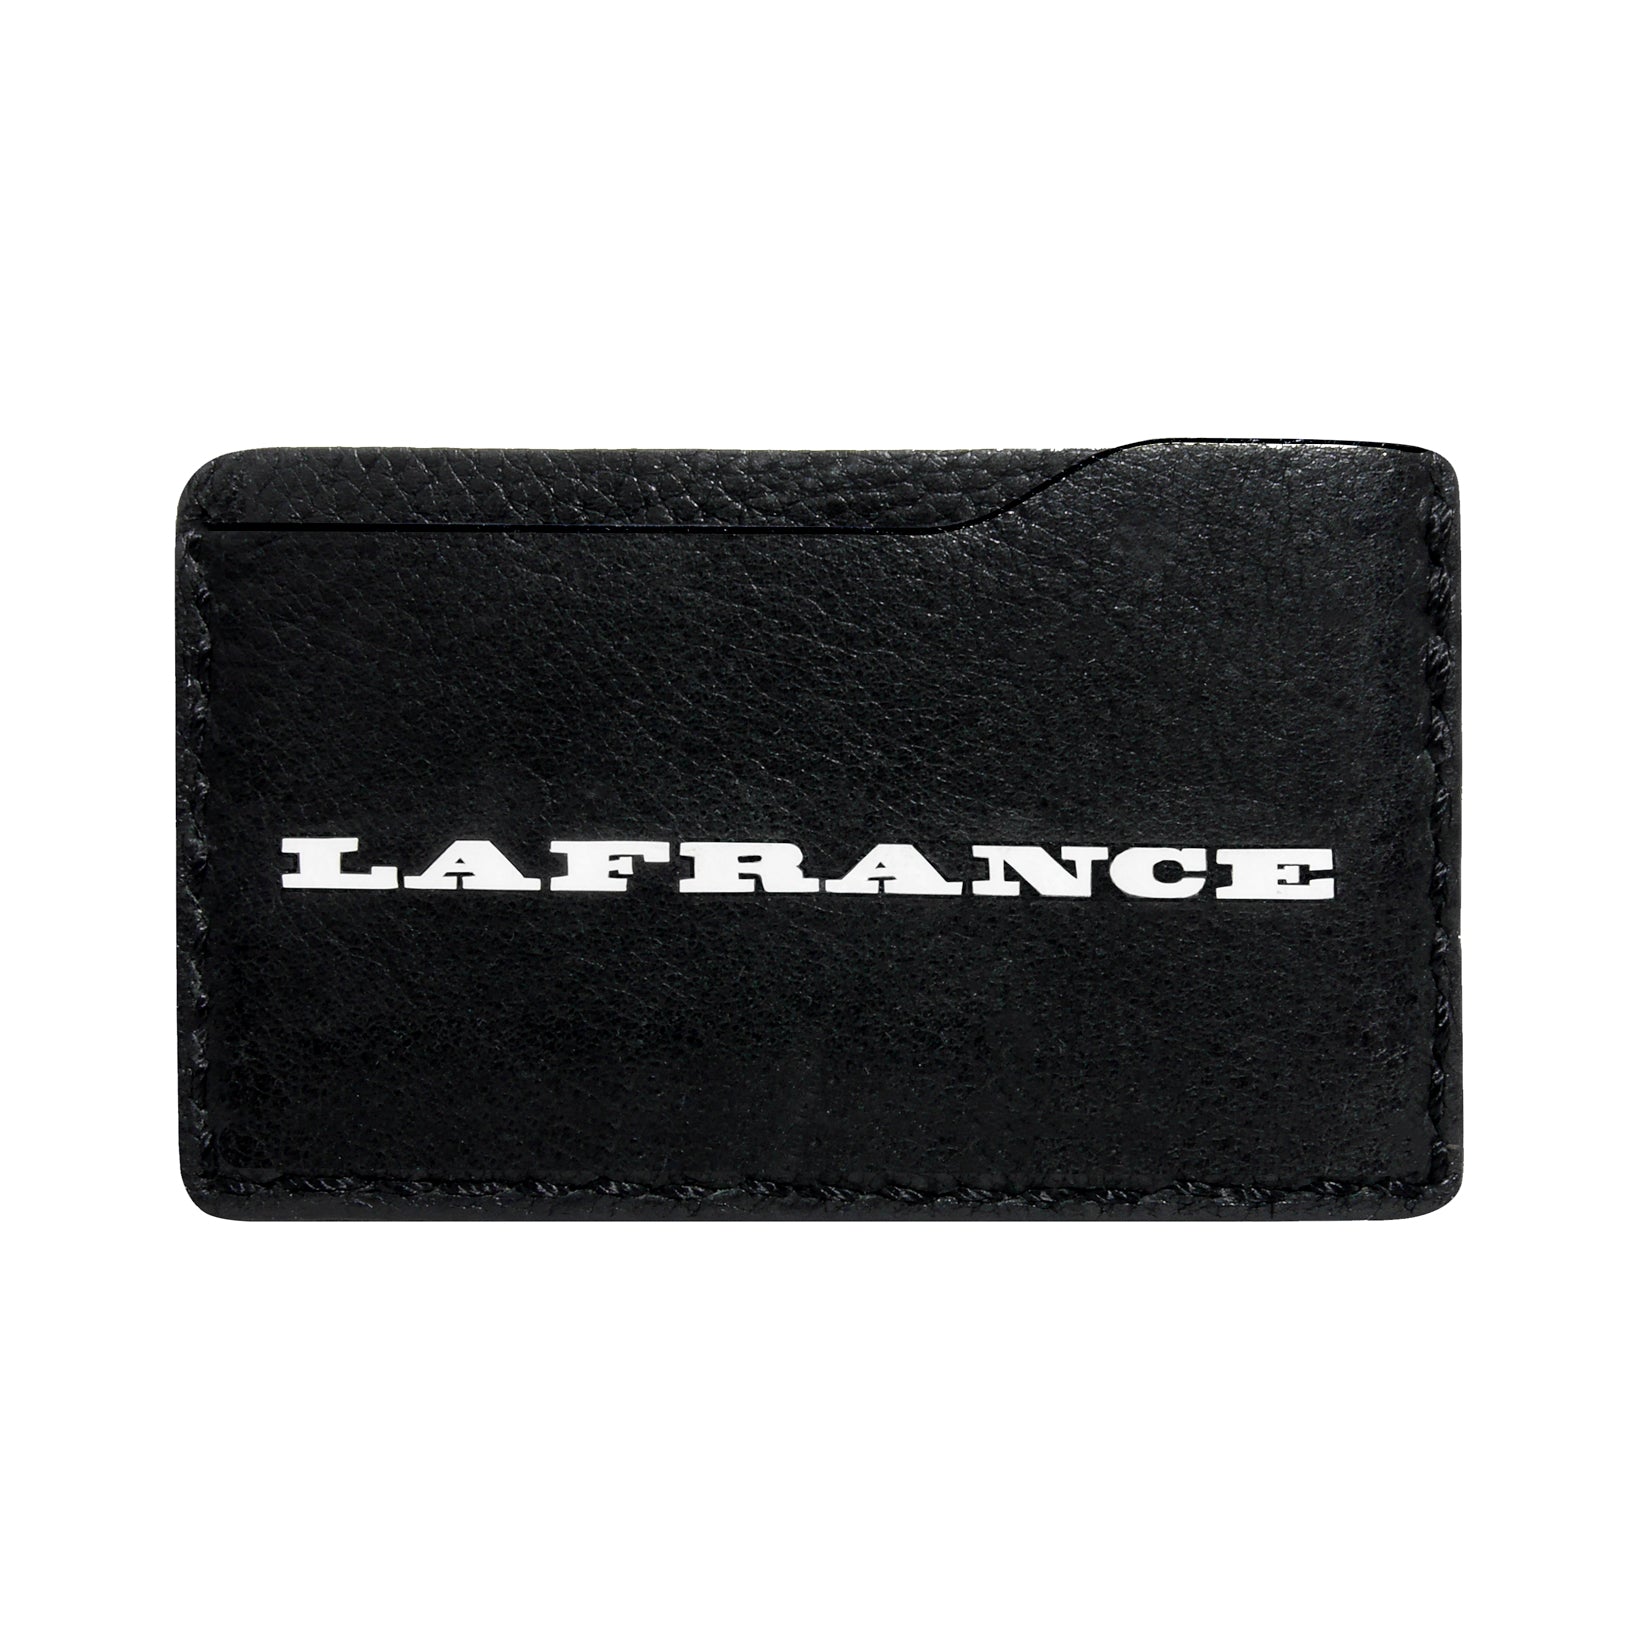 LaFrance Cardholder Made in Canada